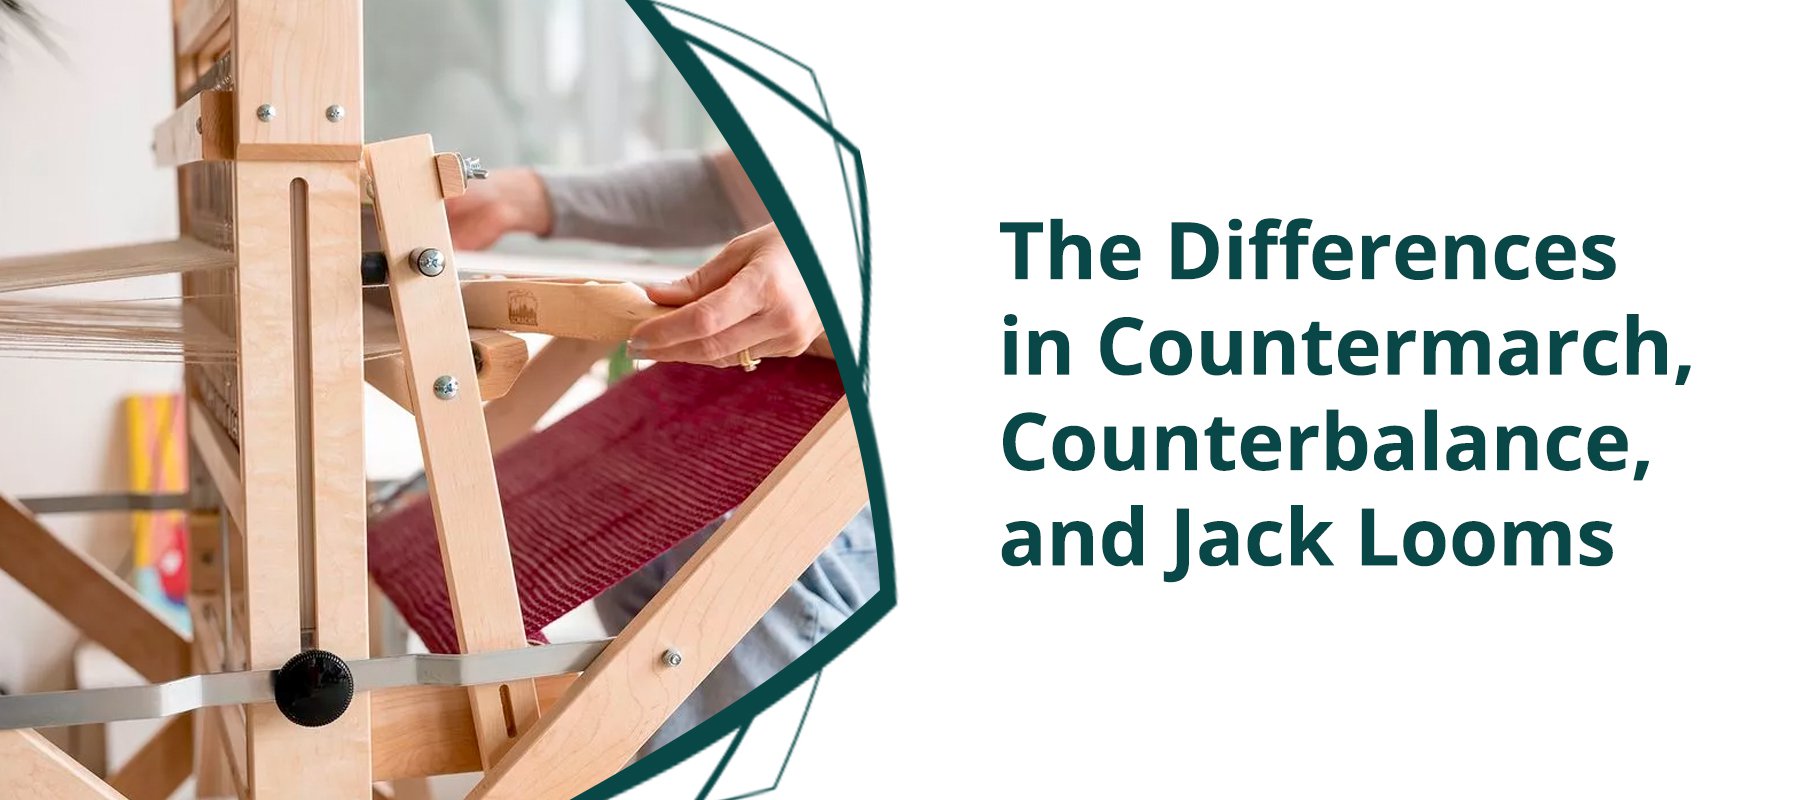 Exploring the Differences between Countermarch, Counterbalance, and Jack Looms